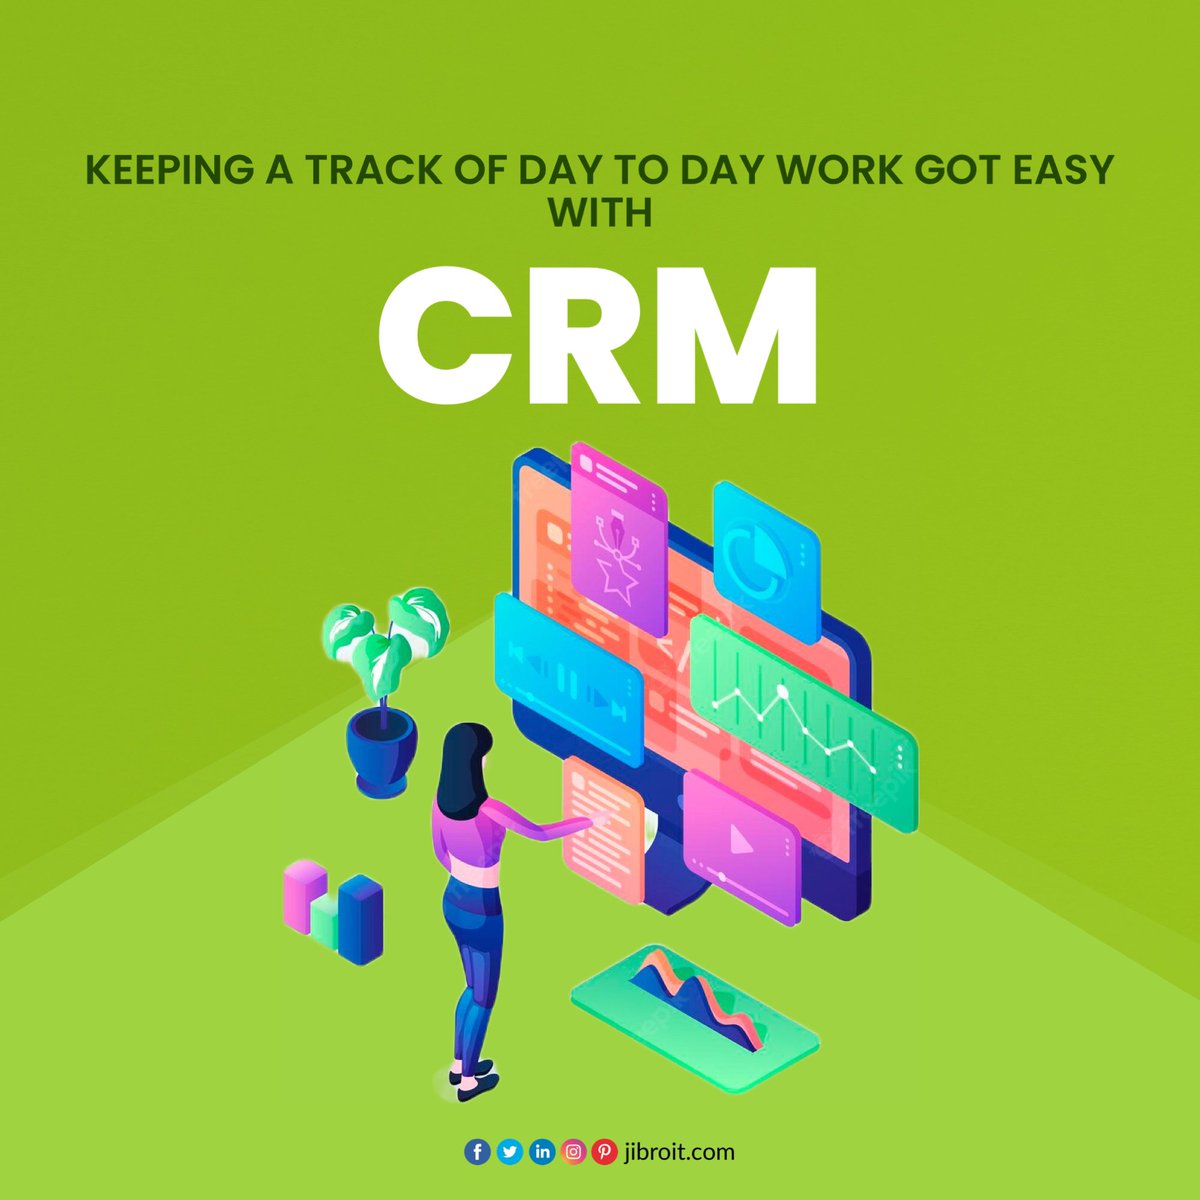 Keep track of all your customer relationships with our reliable #CRMDevelopment solutions!

#crmsoftware #crmsystem #crmintegration #crmmanagement #crmdeveloper #crmconsultant #jibroit